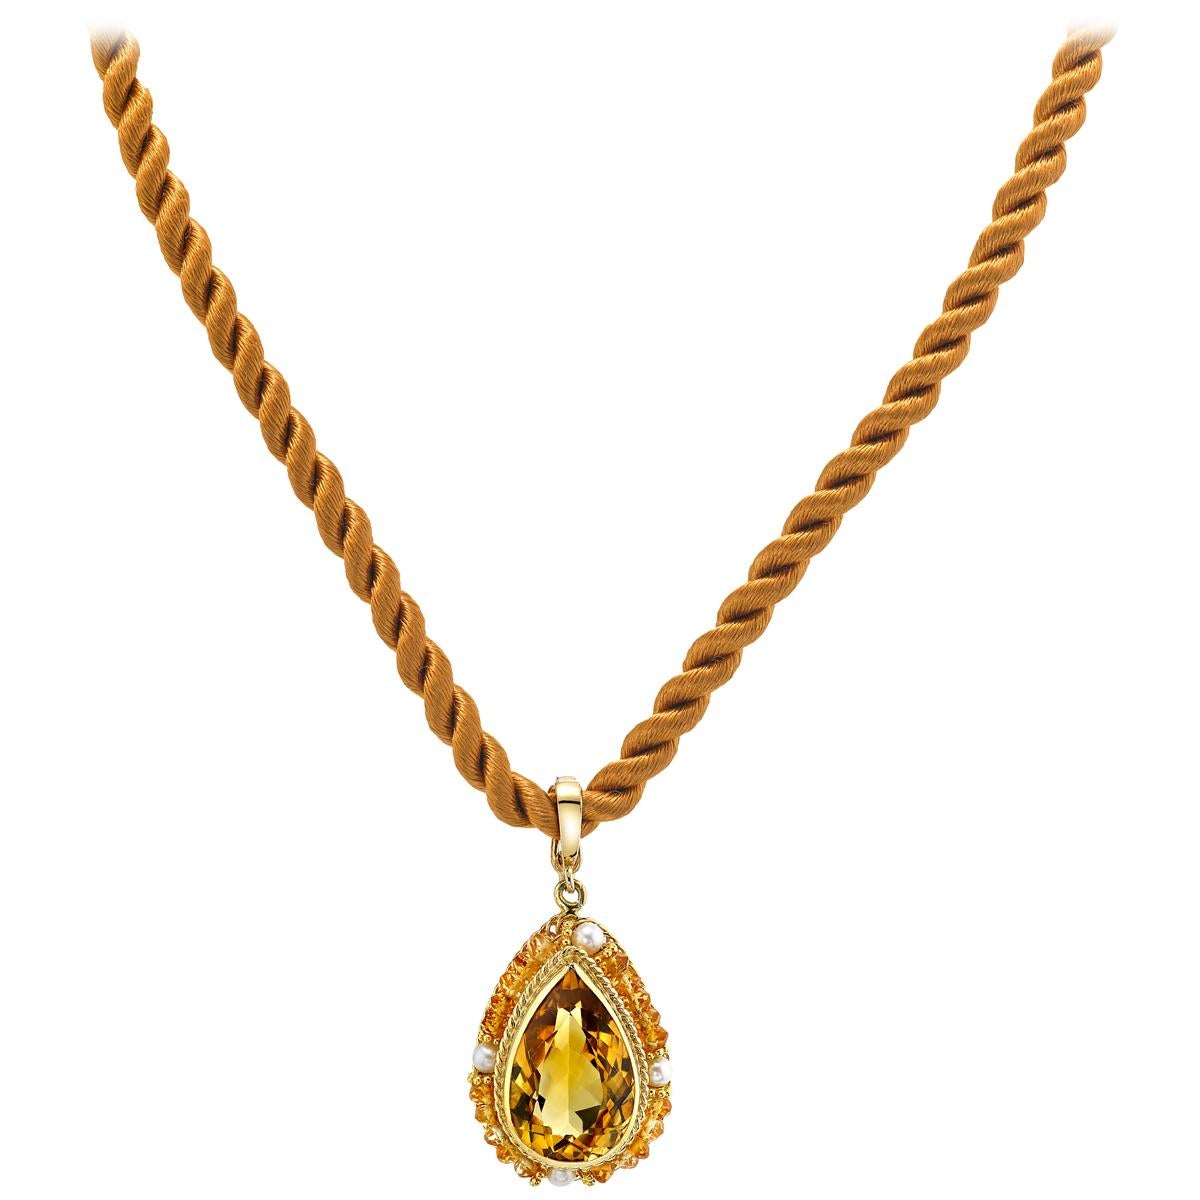 This beautiful pendant features a golden pear shaped citrine encircled by citrine beads and pearls. The pendant is entirely hand made of 18 karat yellow gold wire using a gold wire filigree technique rarely seen today. The jeweler who made this